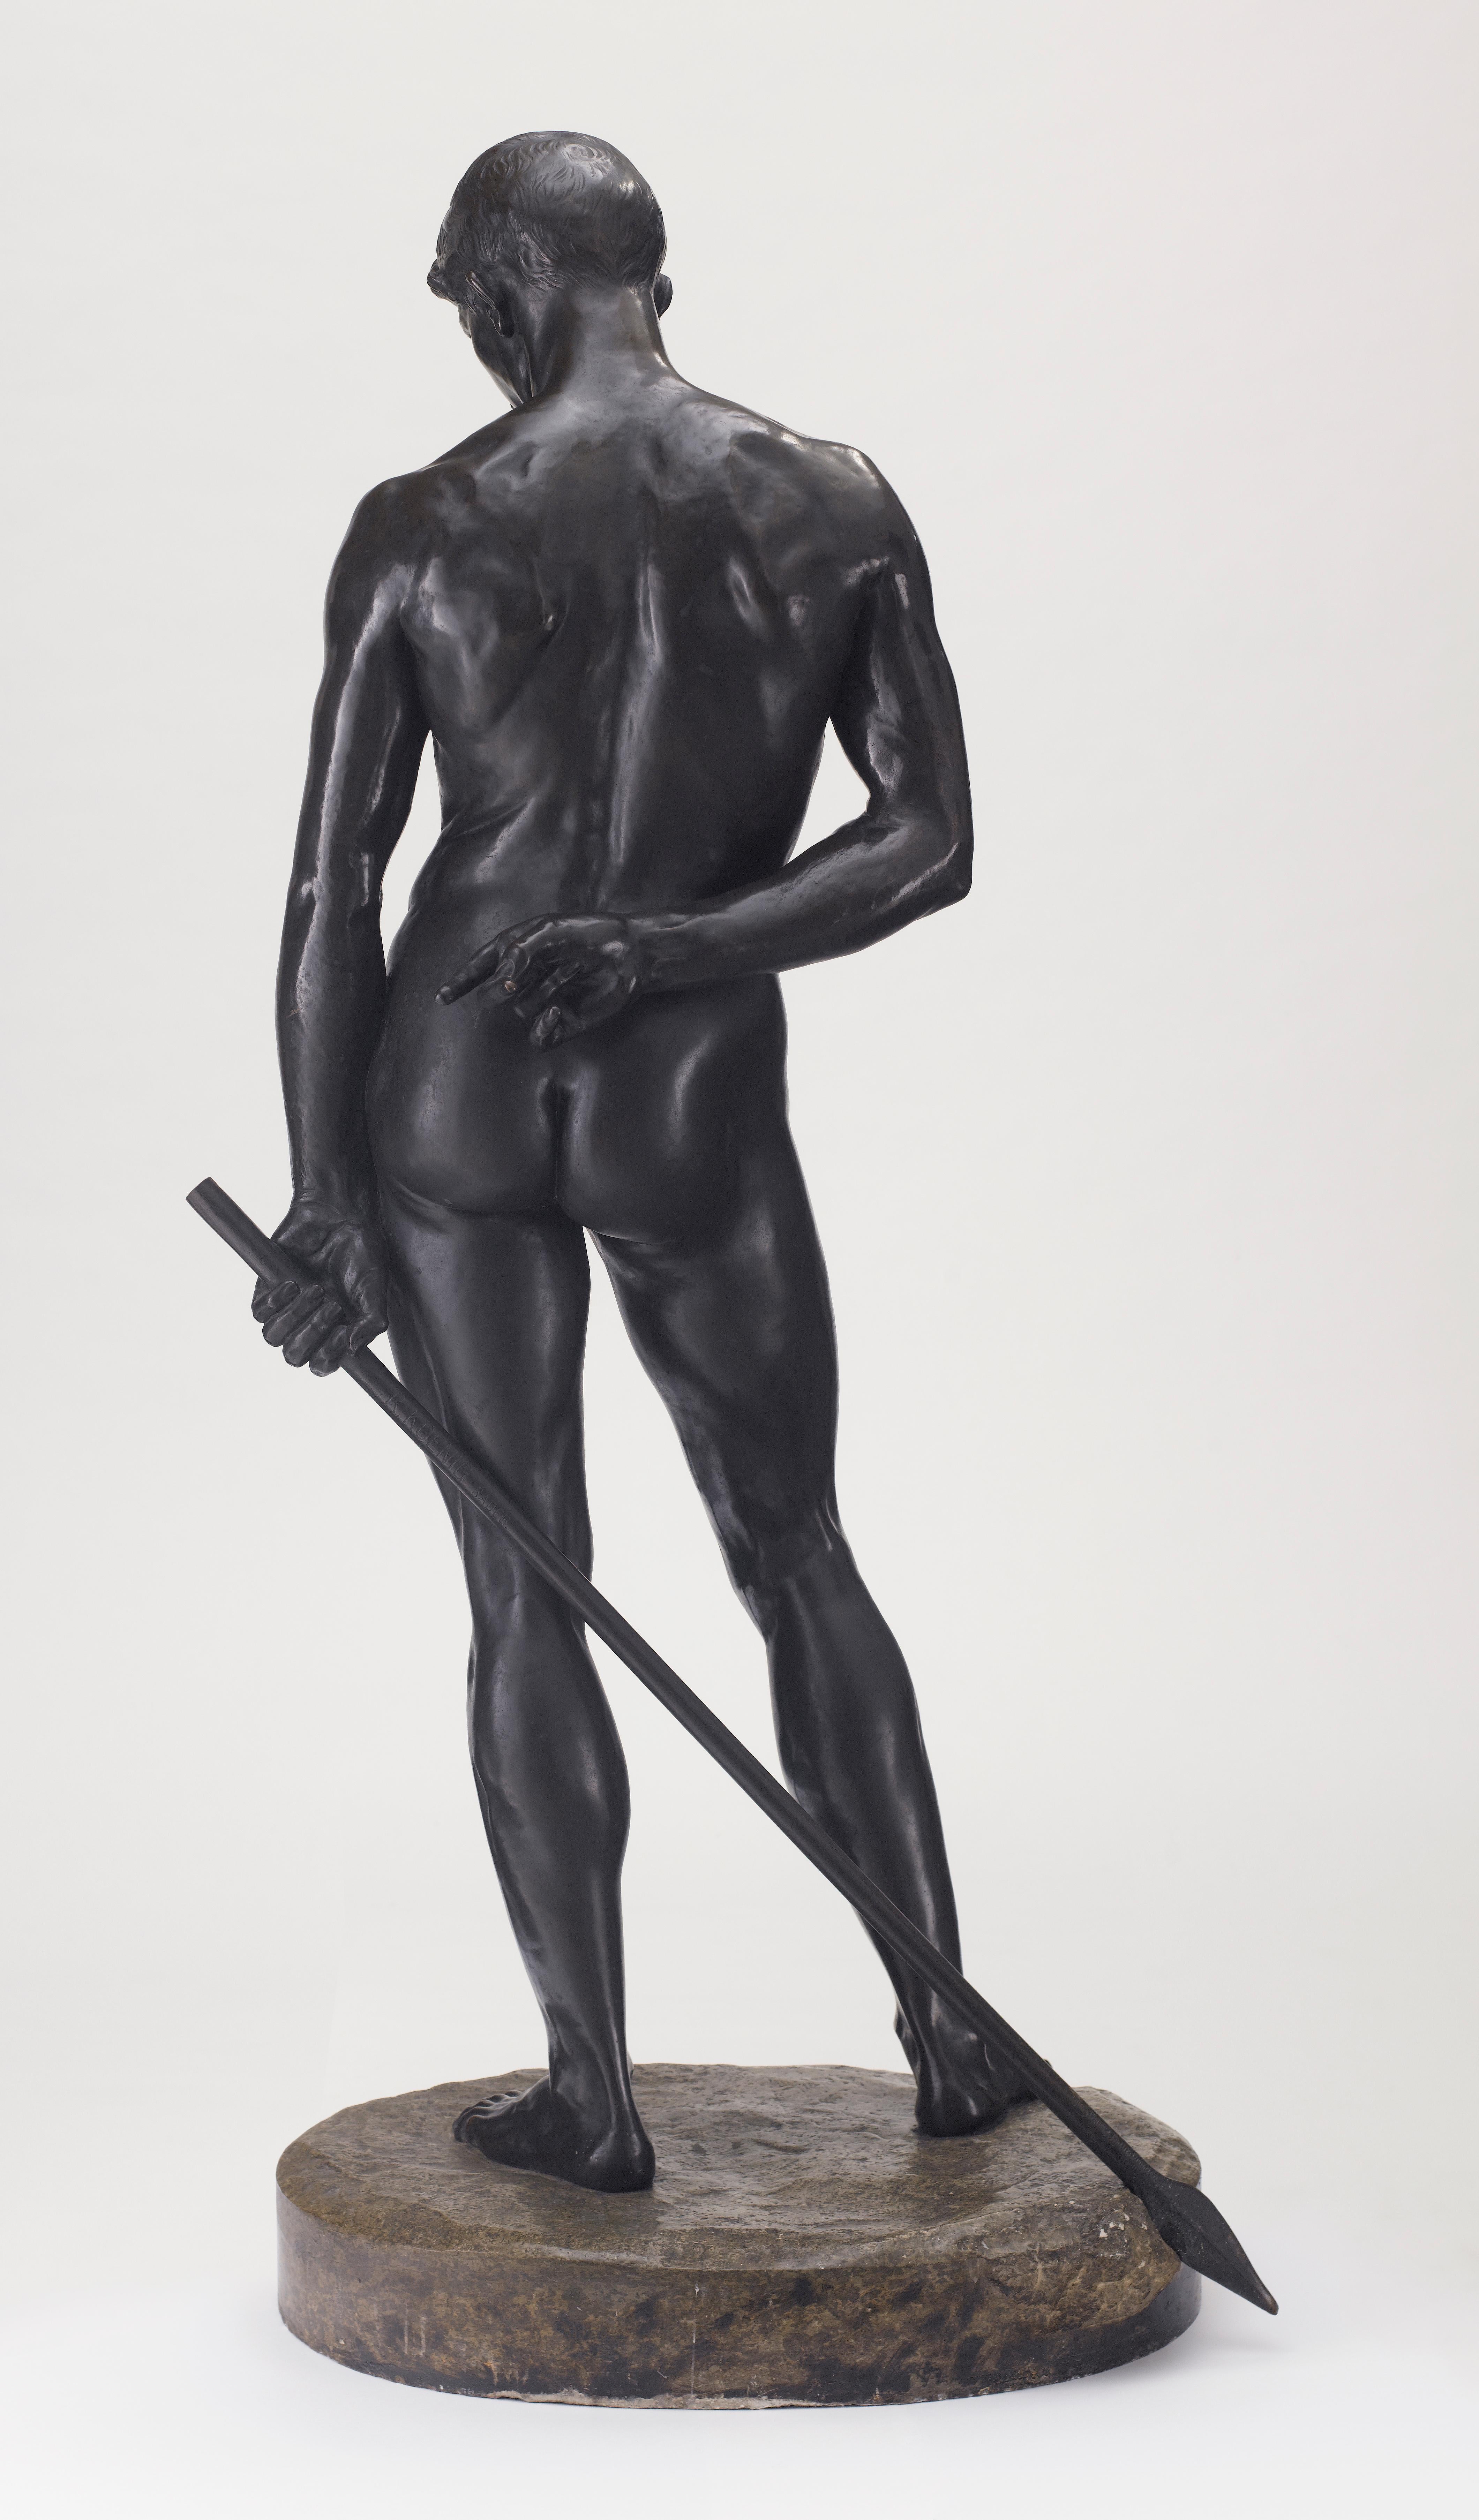 Life-size bronze sculpture, dark patina, mounted on an oval, naturalistically modeled bronze plinth, imitating a stone base. Standing male nude, holding a spear in his left hand, his right clasped behind his back. Signed and inscribed on the lance: